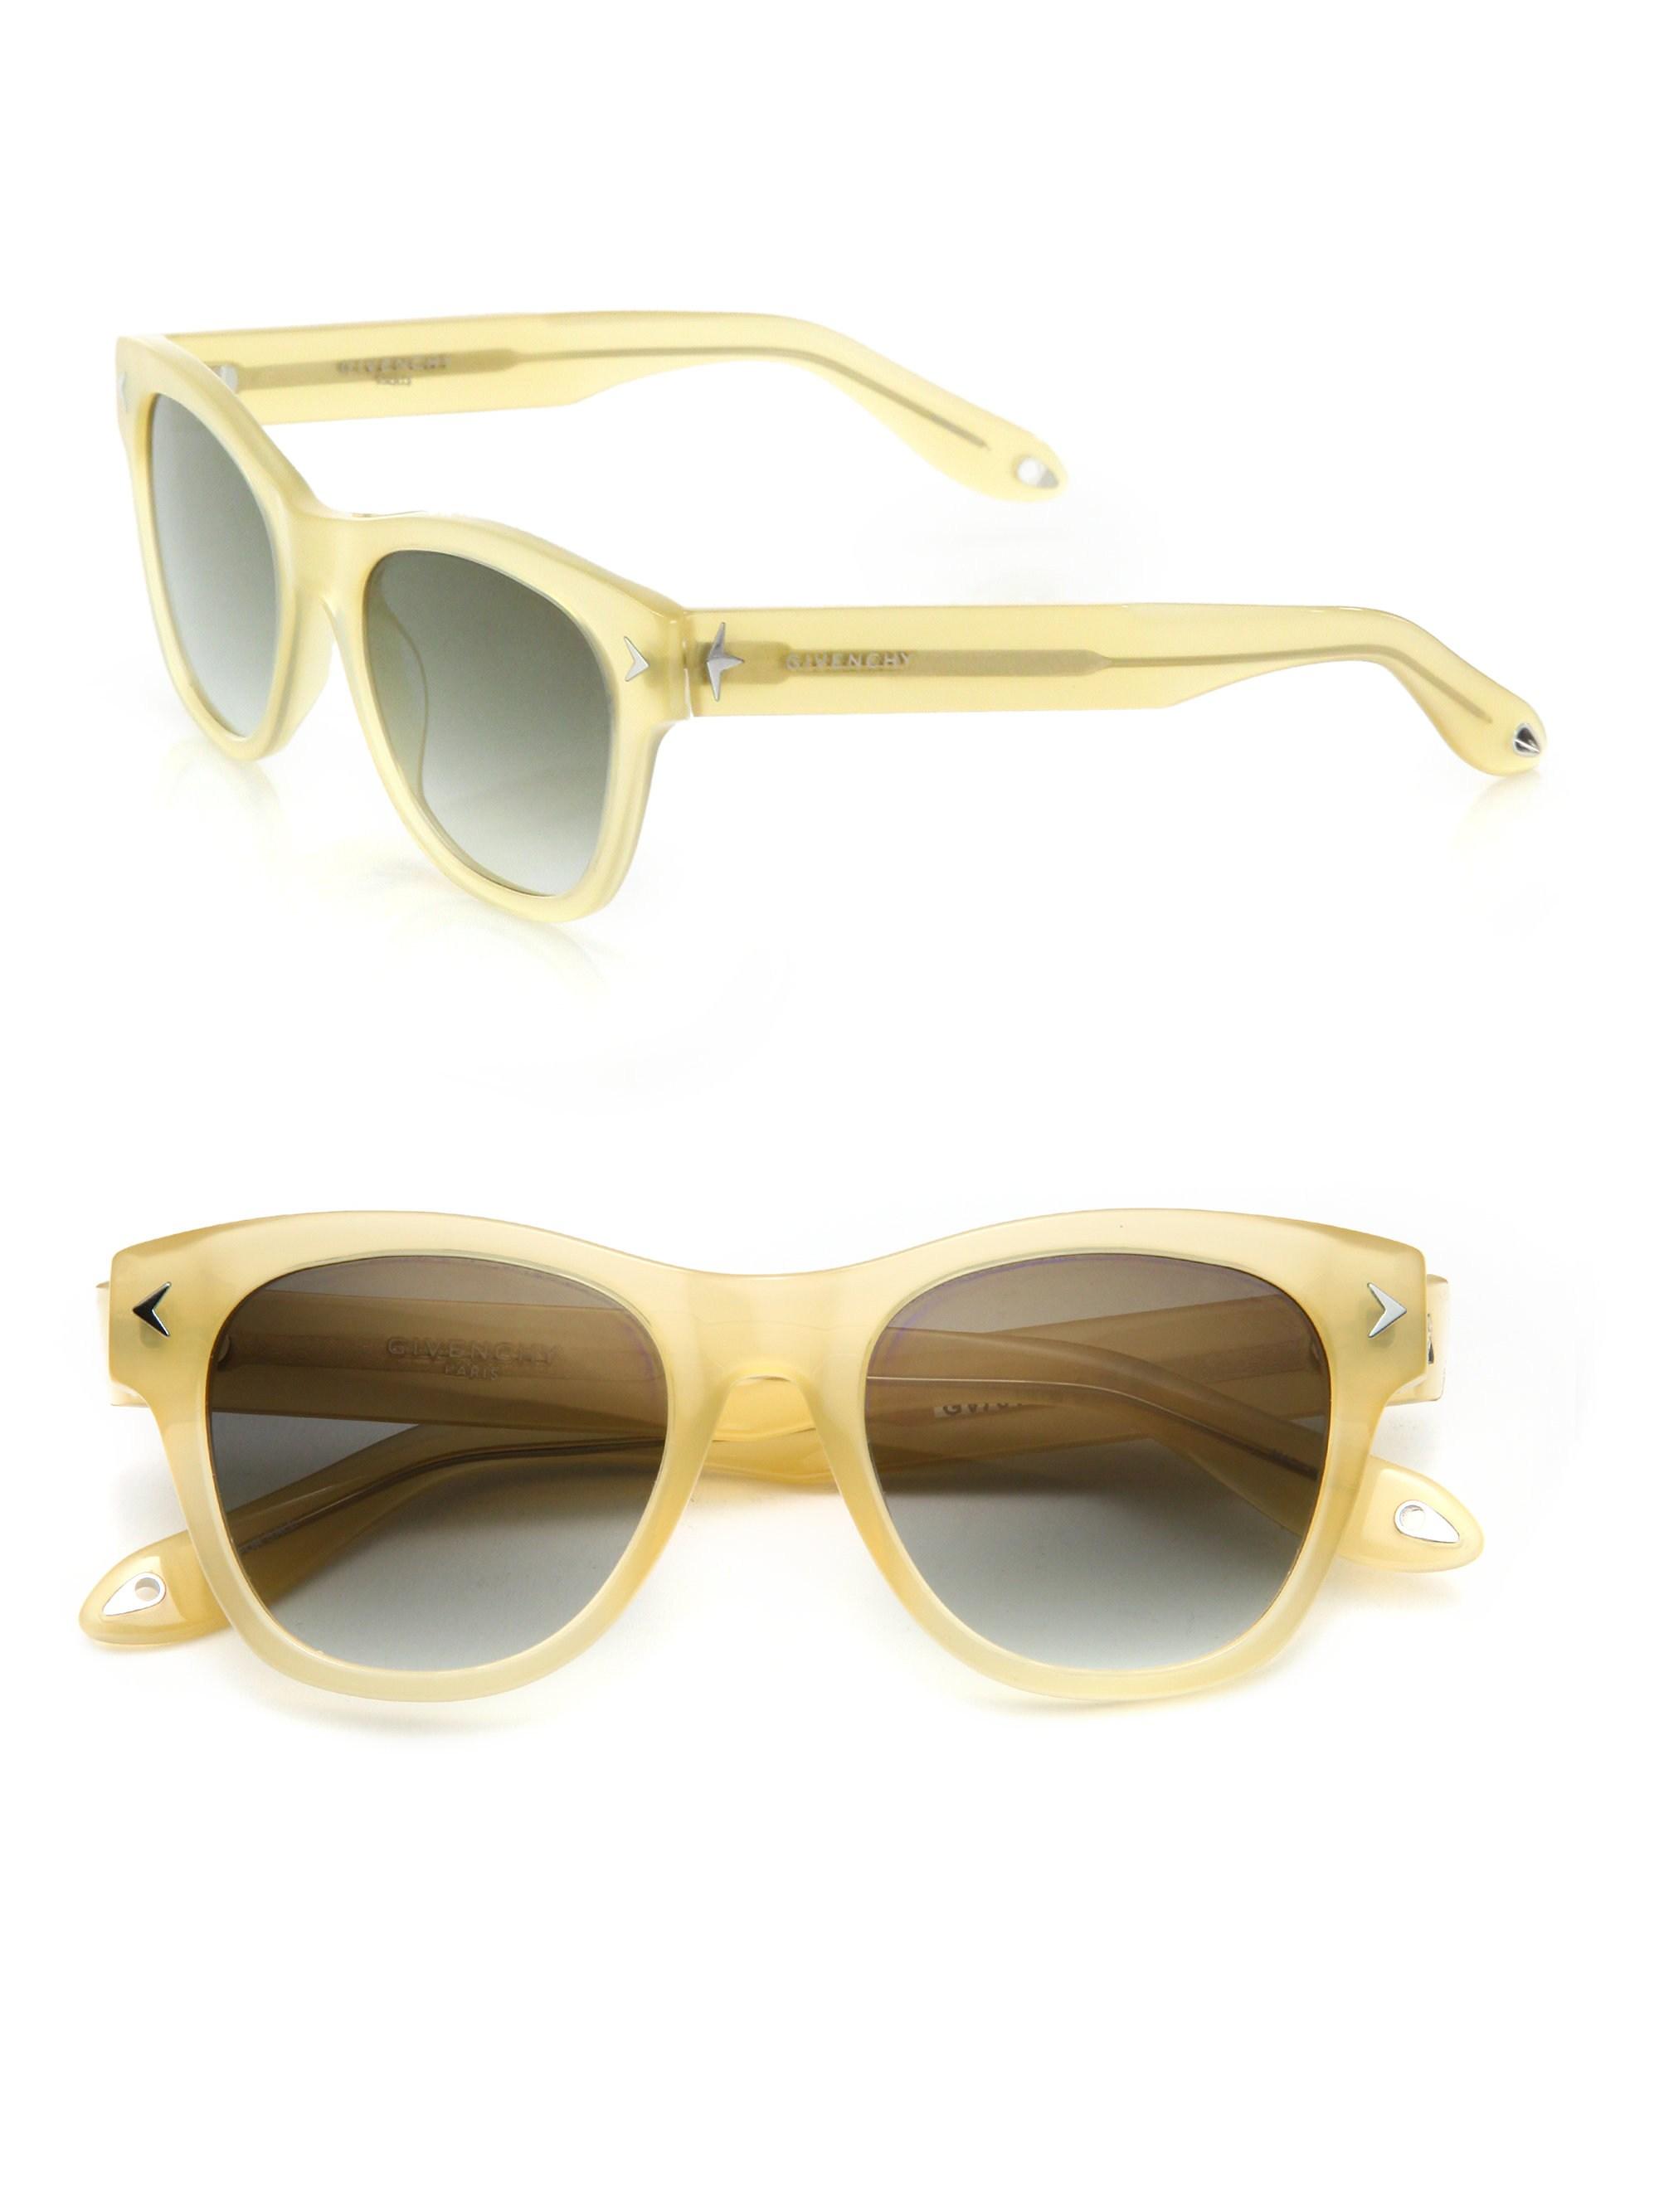 Lyst - Givenchy 21mm Star-detail Rectangular Sunglasses in Yellow